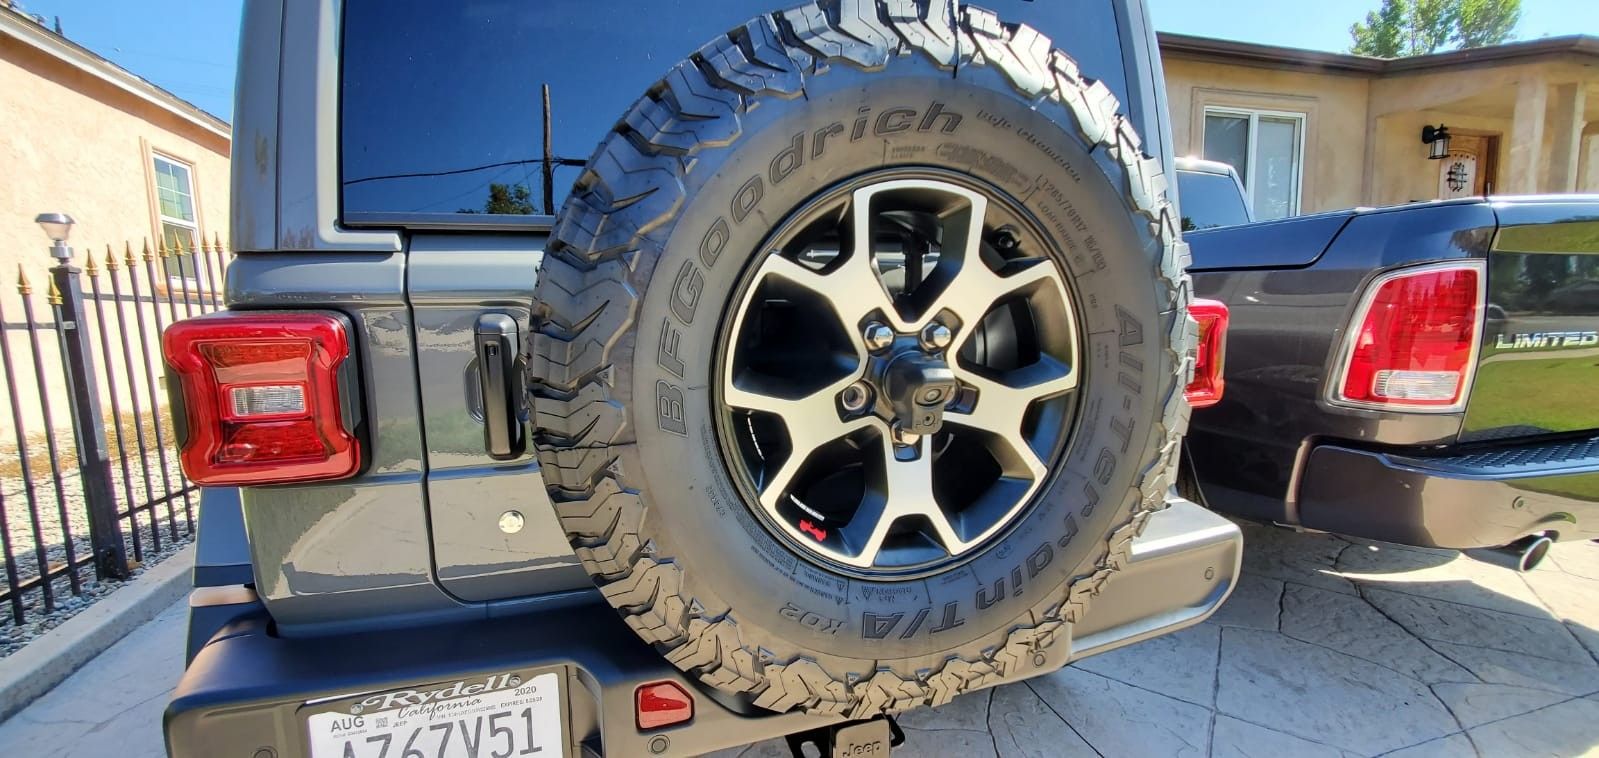 Jeep Rubicon 33" tires on 17" wheels total of 5